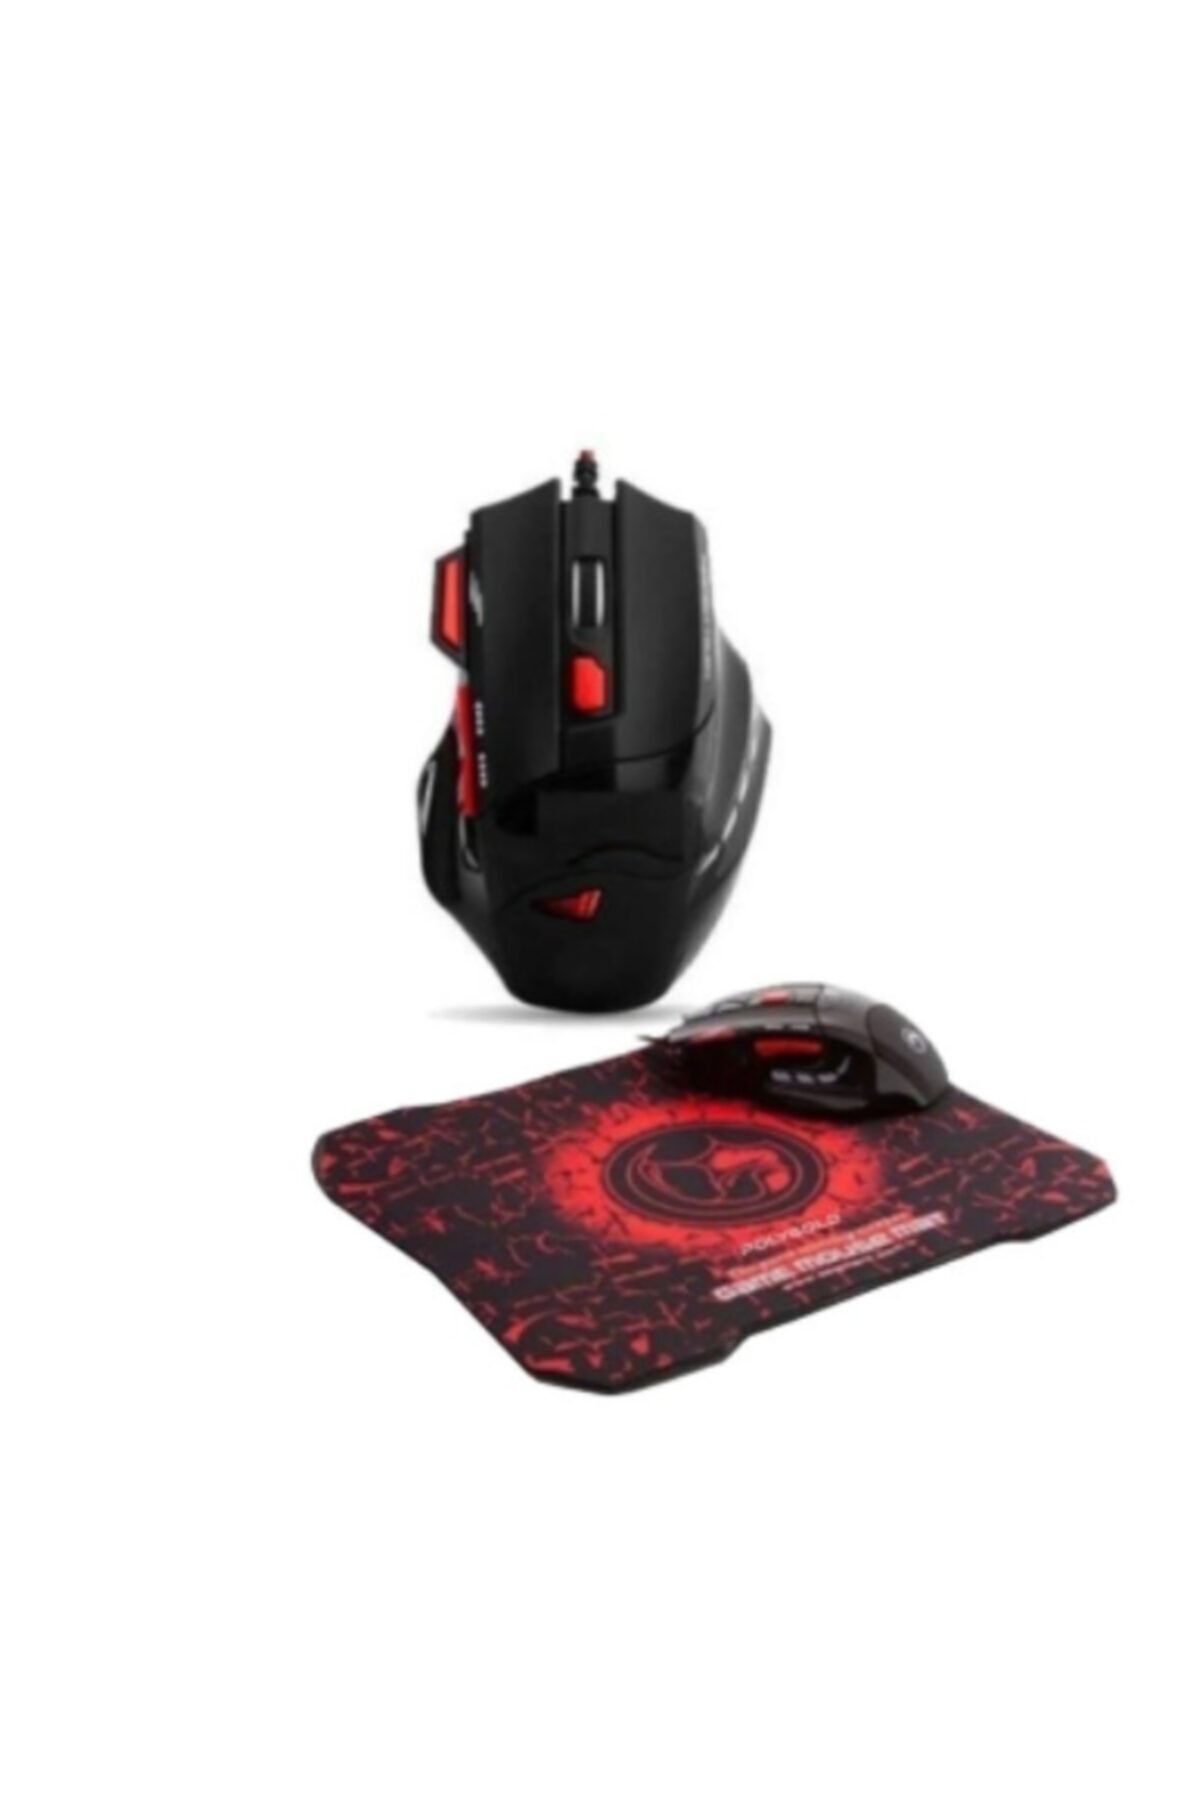 gaziantepteknik Polygold Pg-900 X7 Gaming Oyuncu Mouse + Mouse Pad